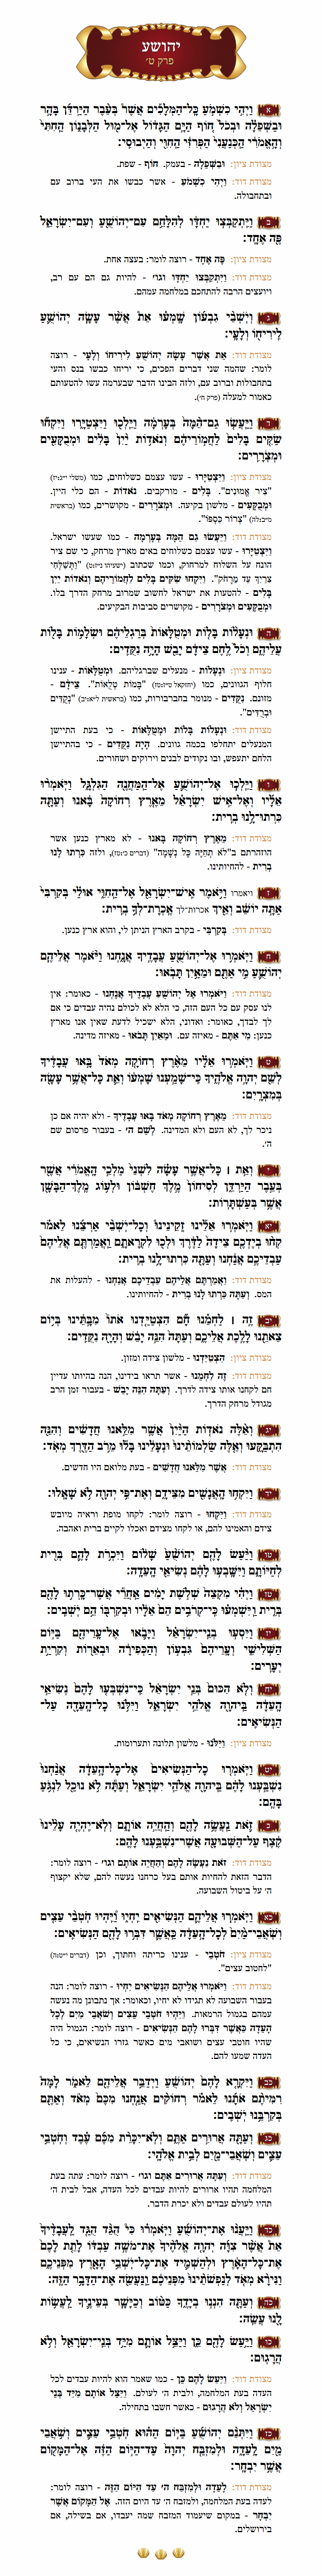 Sefer Yehoshua Chapter 9 with commentary